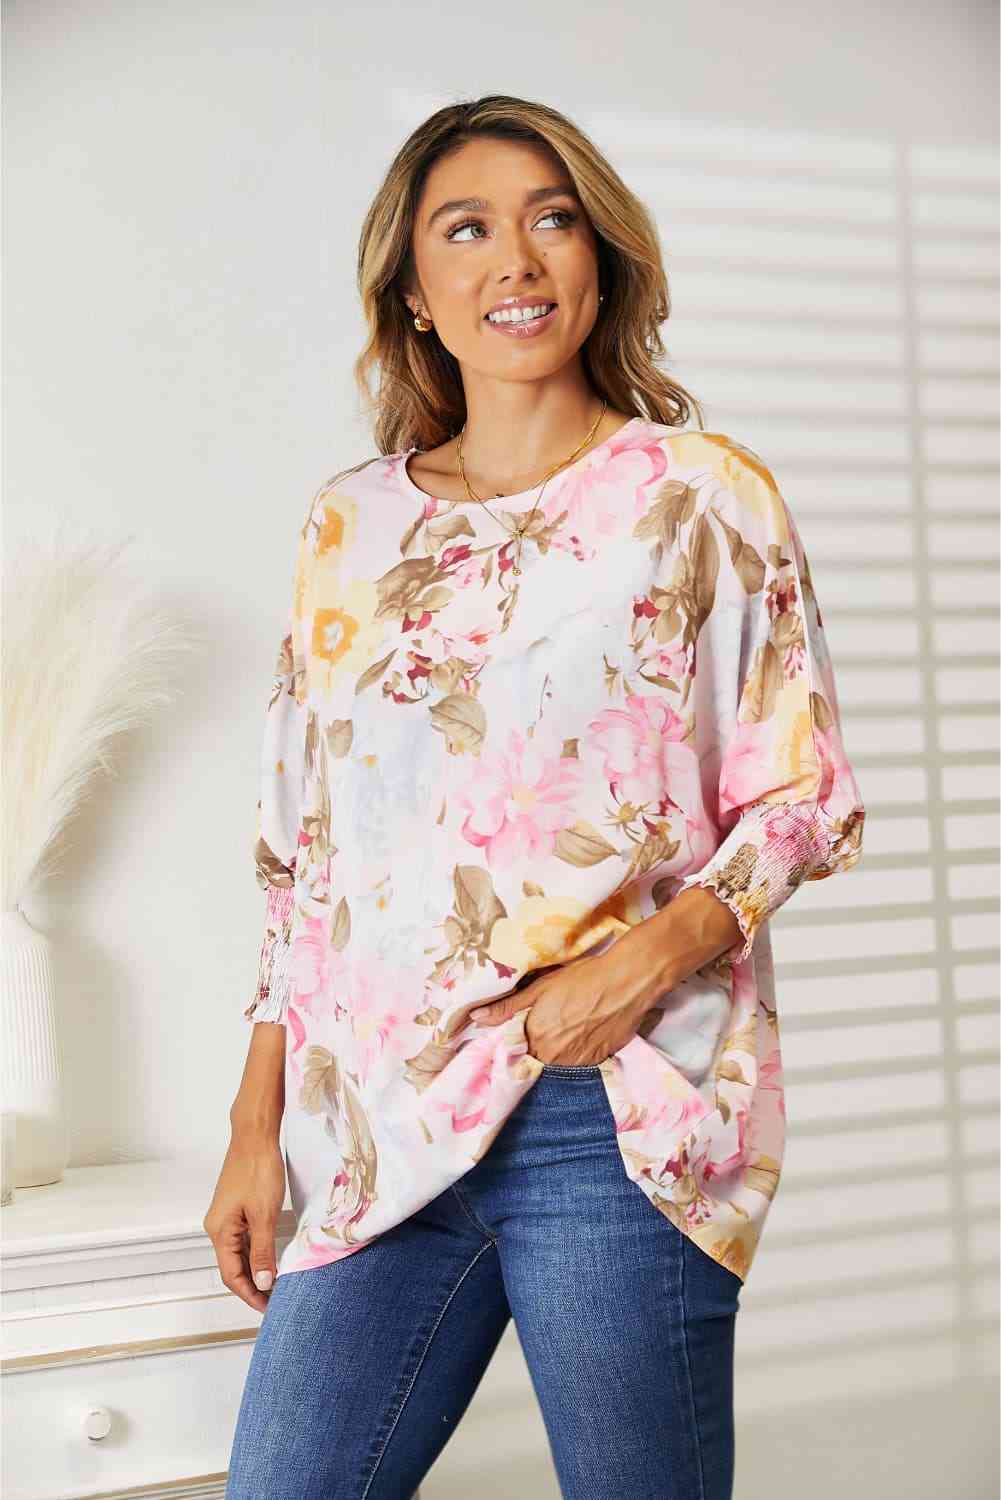 Floral Round Neck Three-Quarter Sleeve Top - Kawaii Stop - Double Take, Dress Up or Down, Elegant Look, Fashionable Top, Floral Three-Quarter Sleeve Top, Pop of Color, Round Neck Blouse, Ship from USA, Statement Piece, Stylish Apparel, Versatile Style, Vibrant Fashion, Women's Clothing